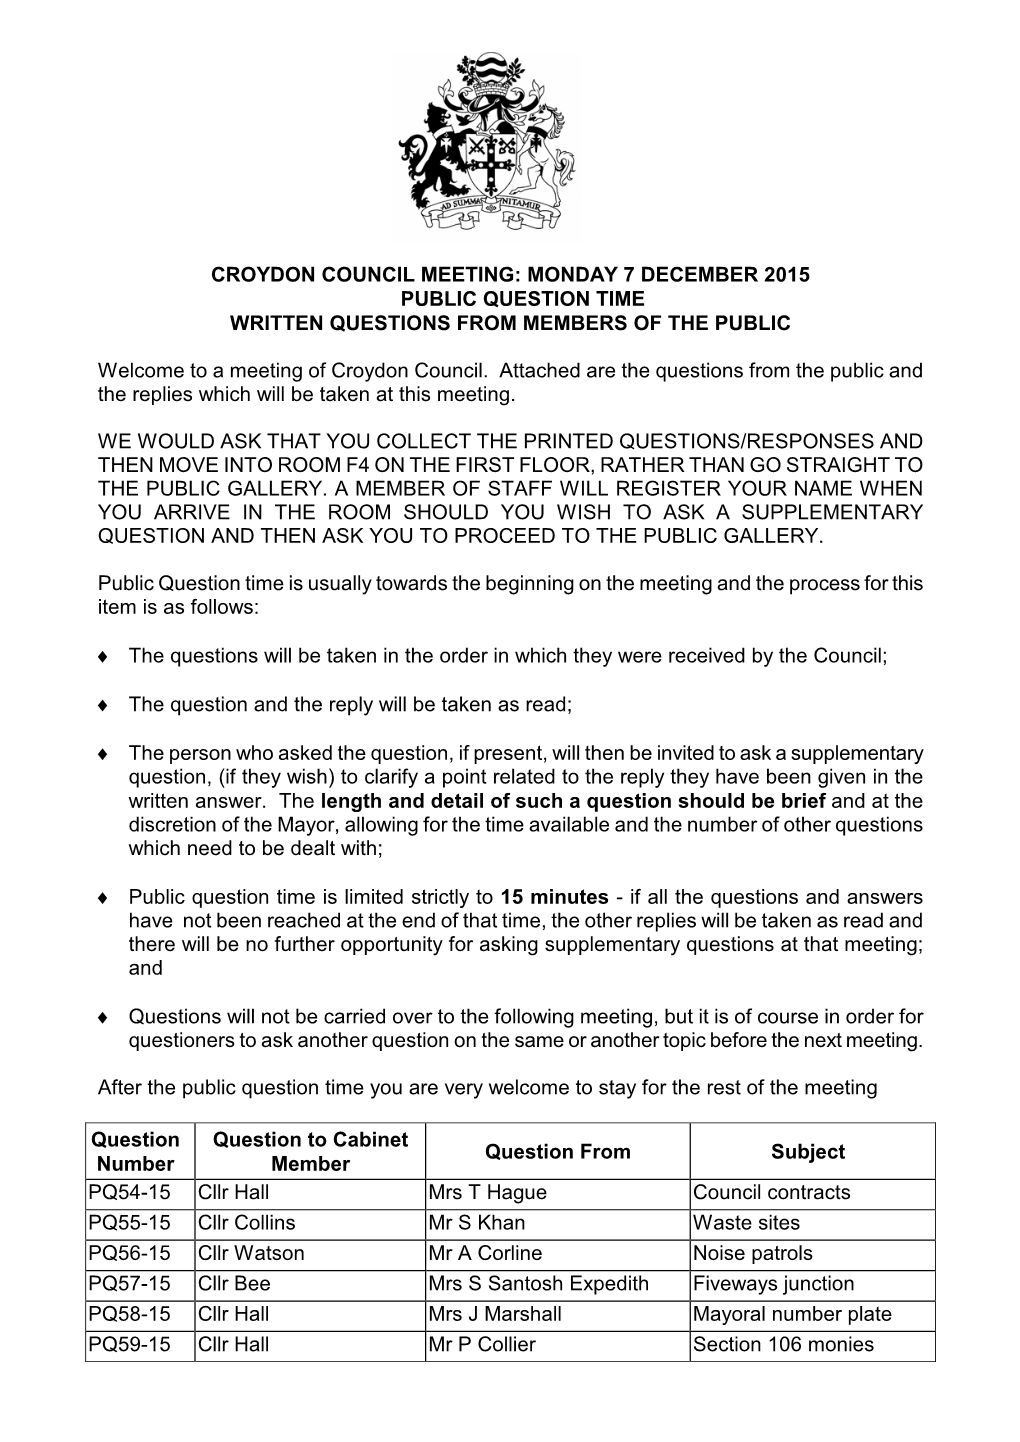 Croydon Council Meeting: Monday 7 December 2015 Public Question Time Written Questions from Members of the Public